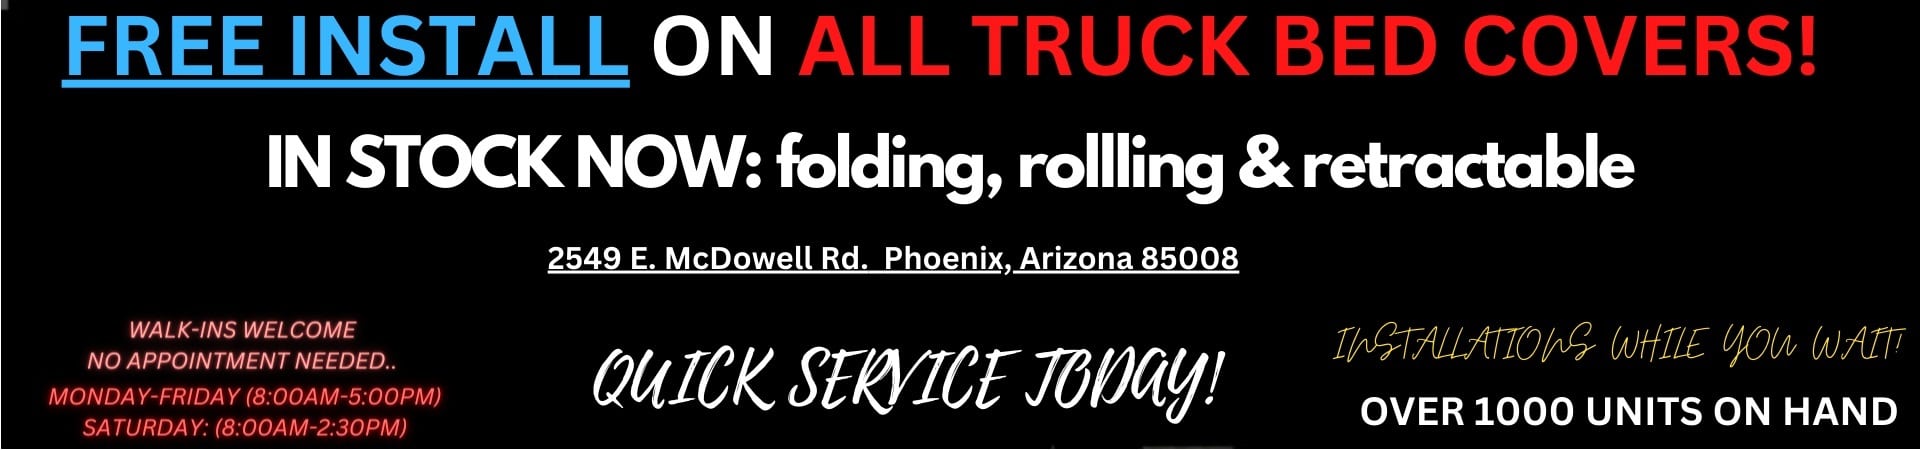 FREE INSTALL ON TRUCK BED COVERS